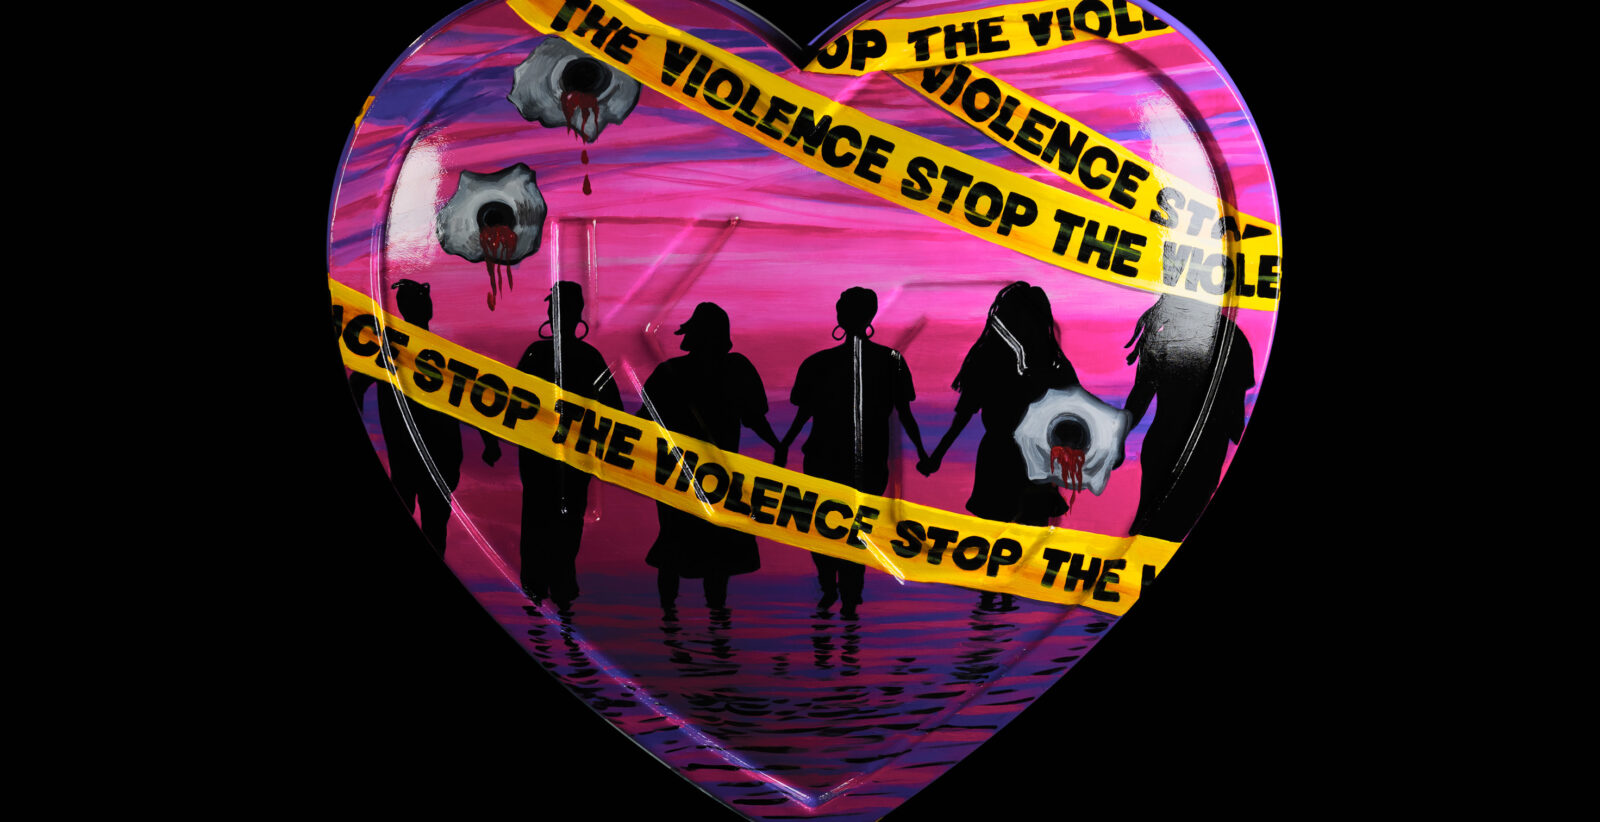 Stop The Violence!